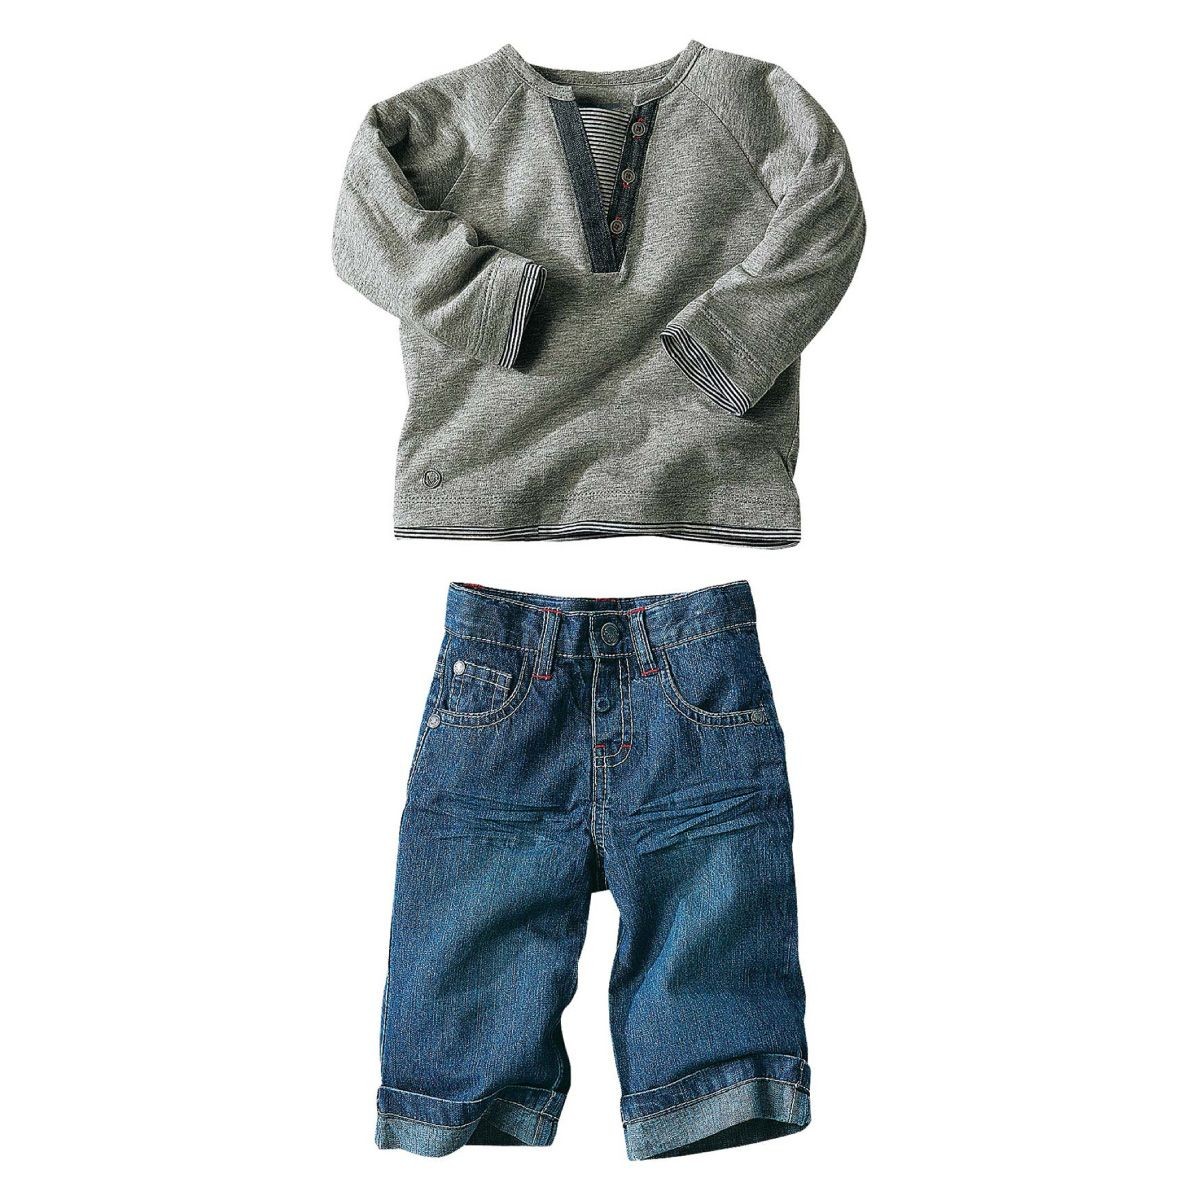 Set: shirt and jeans for baby boy